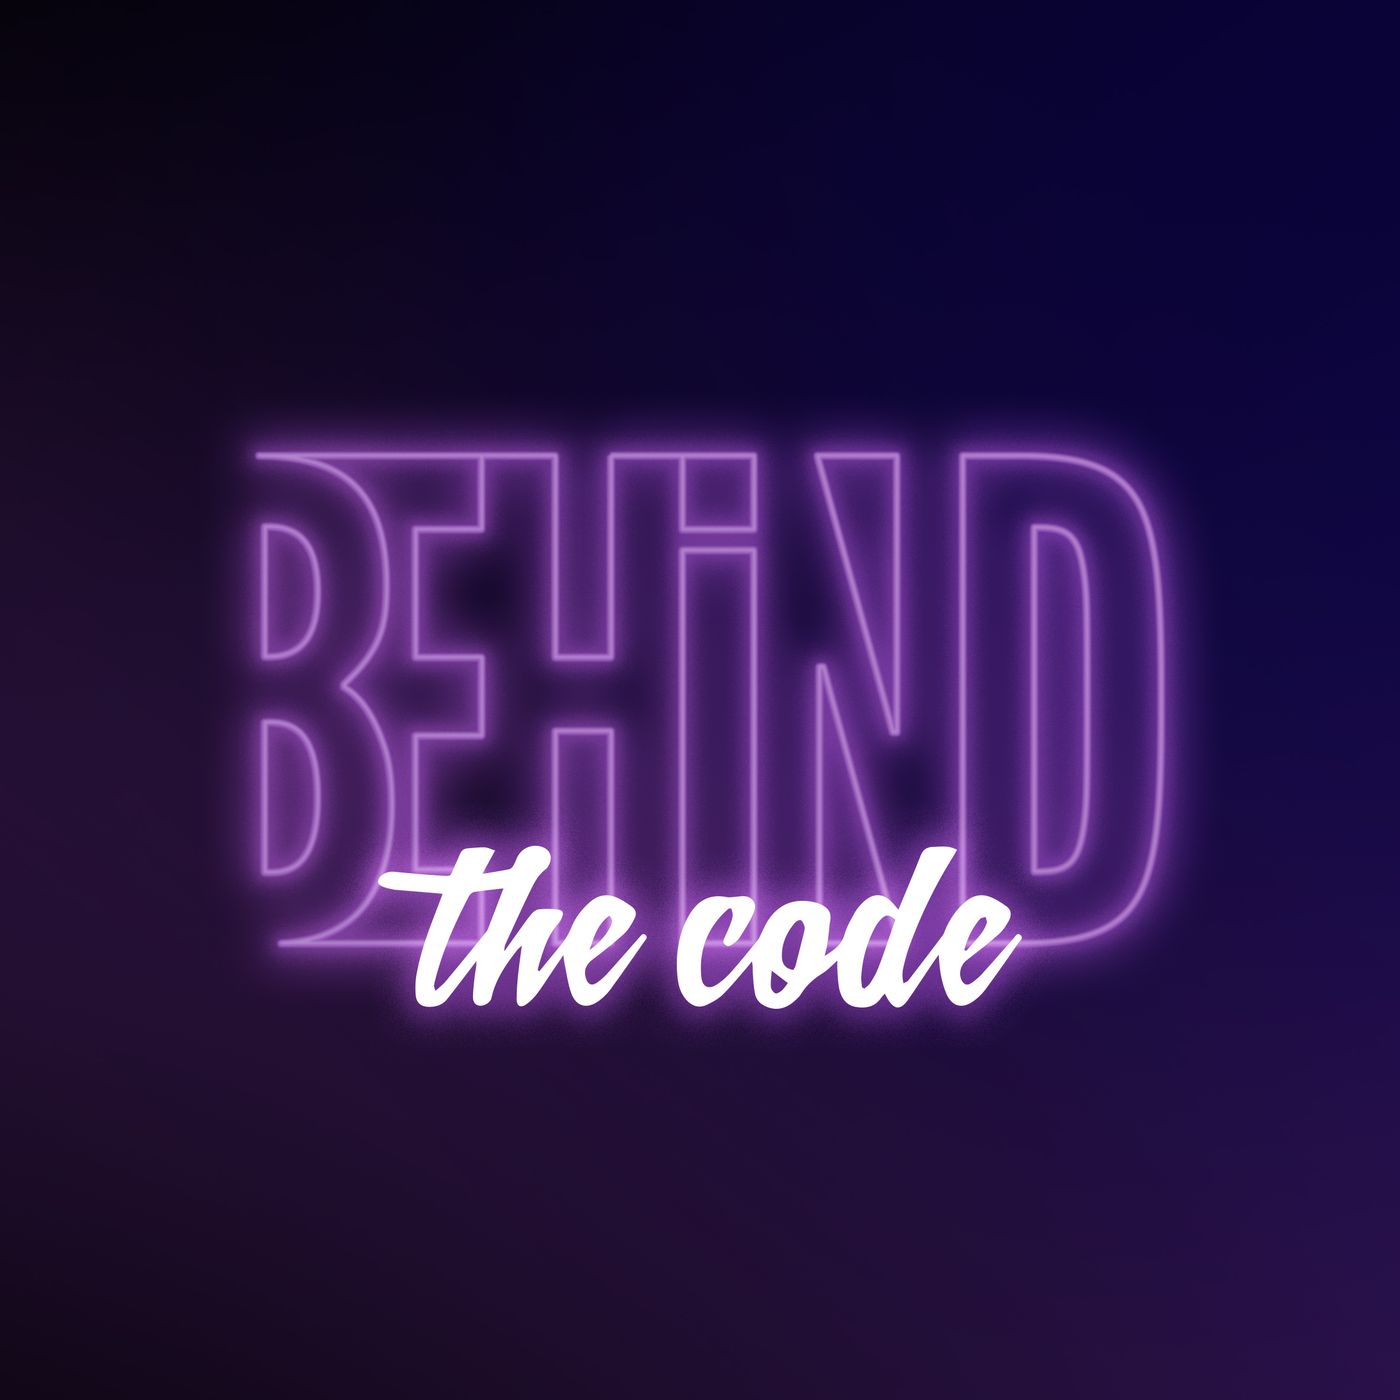 The human side of tech: intro to Behind The Code